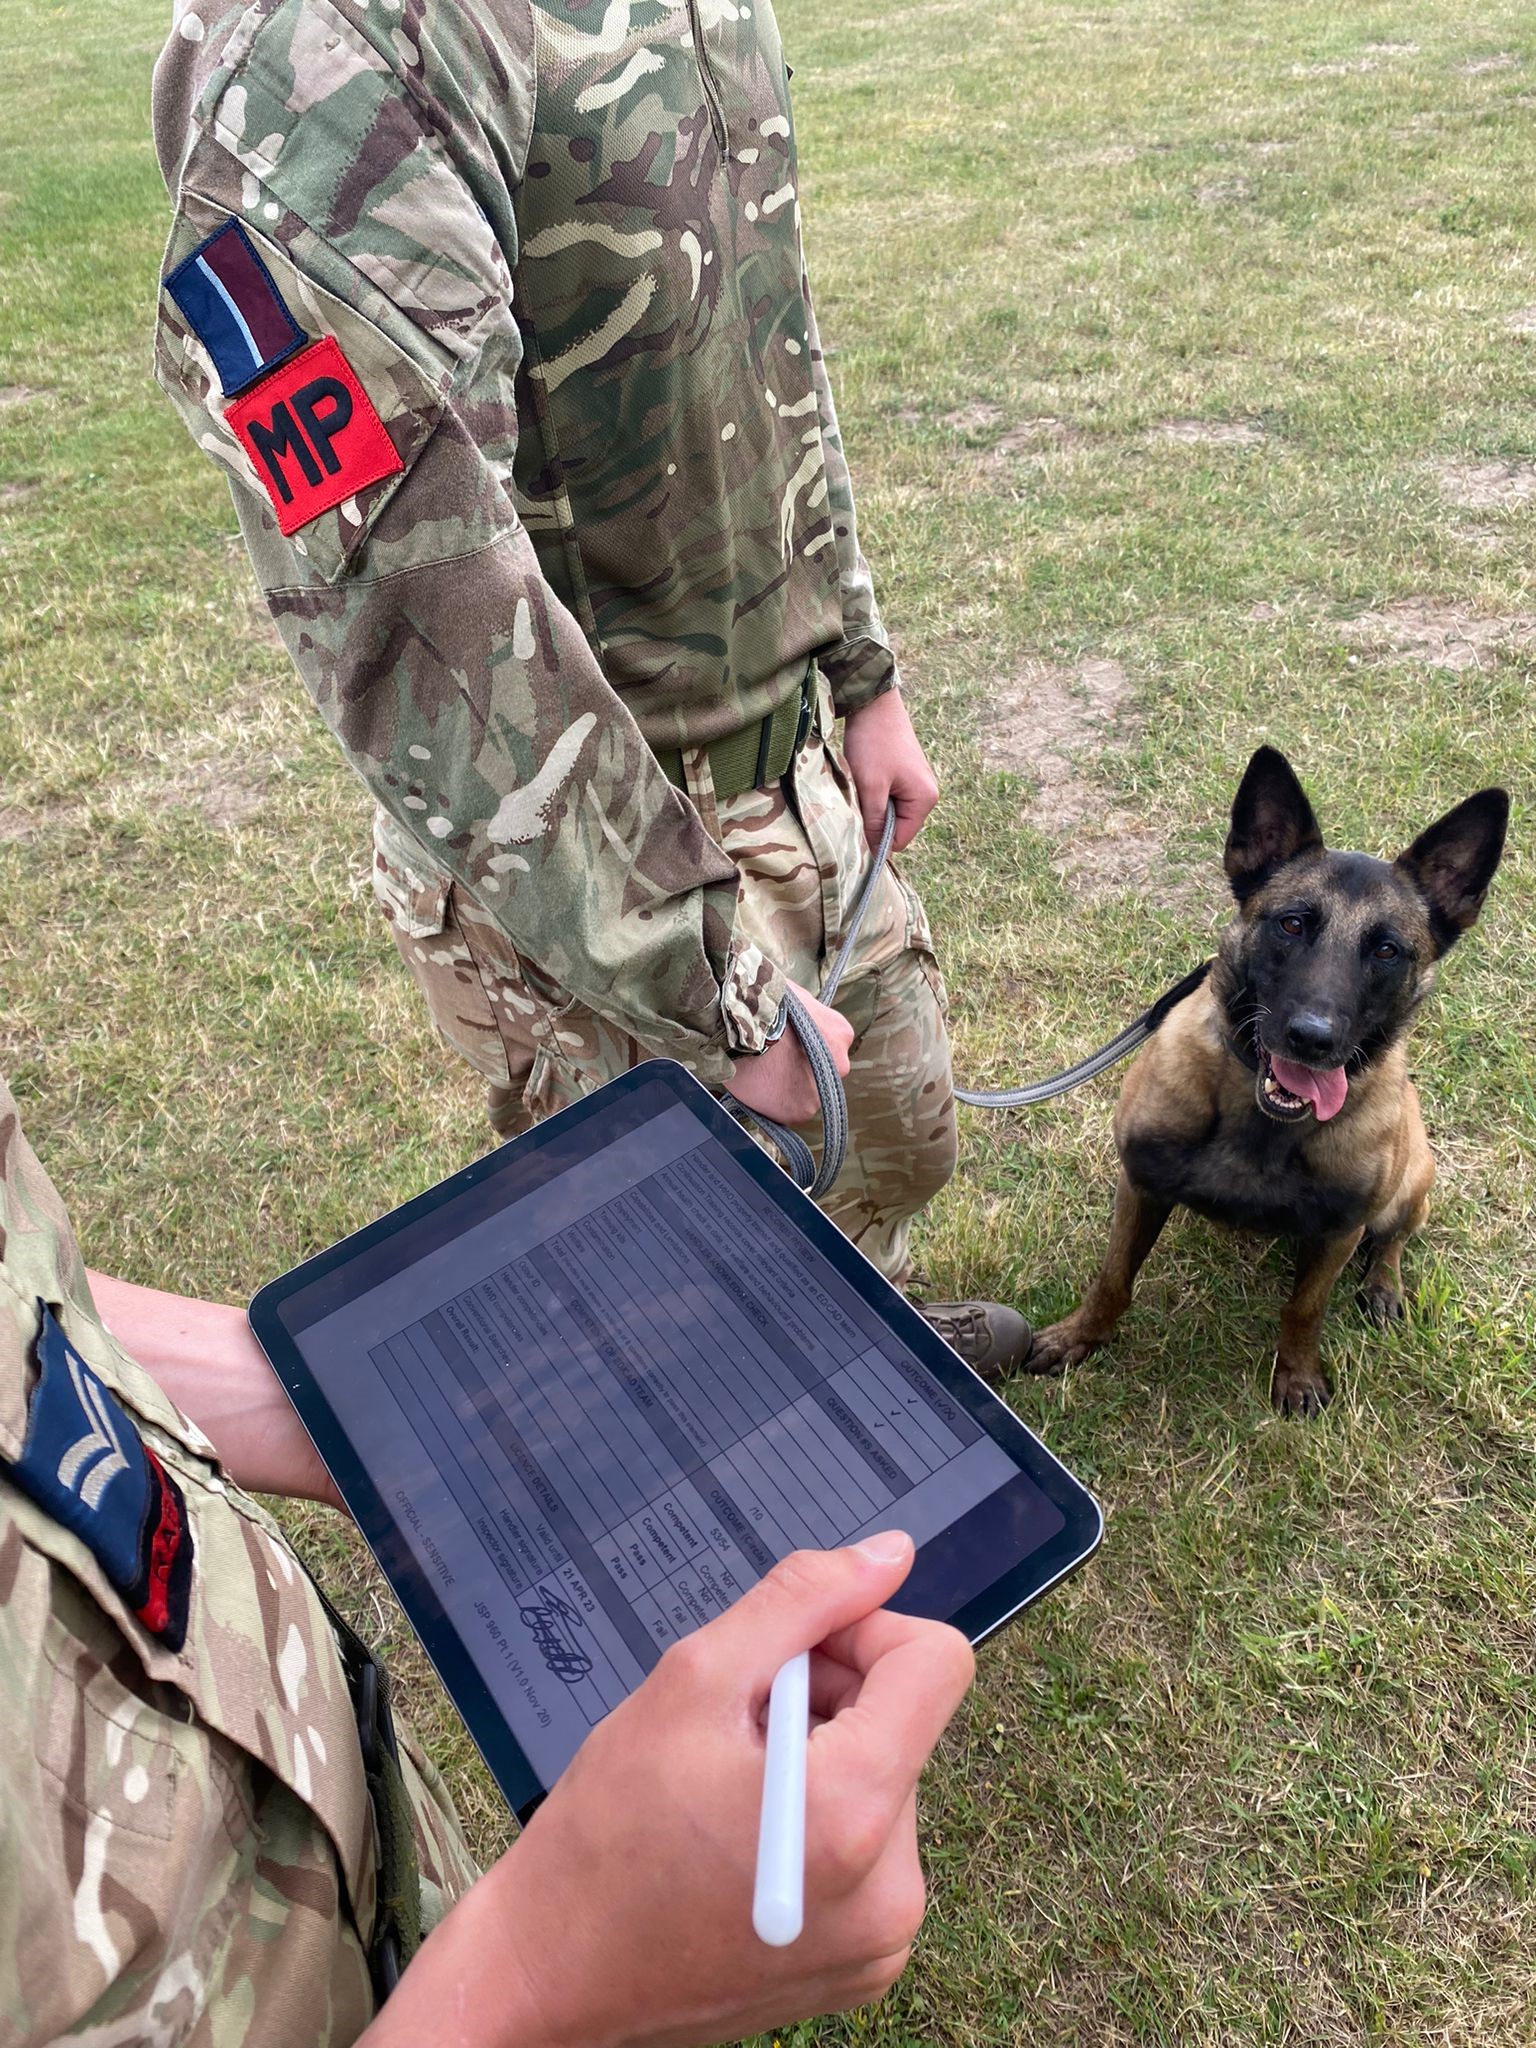 Image shows RAF Police Officer holding a digital tablet with another officer and dog.